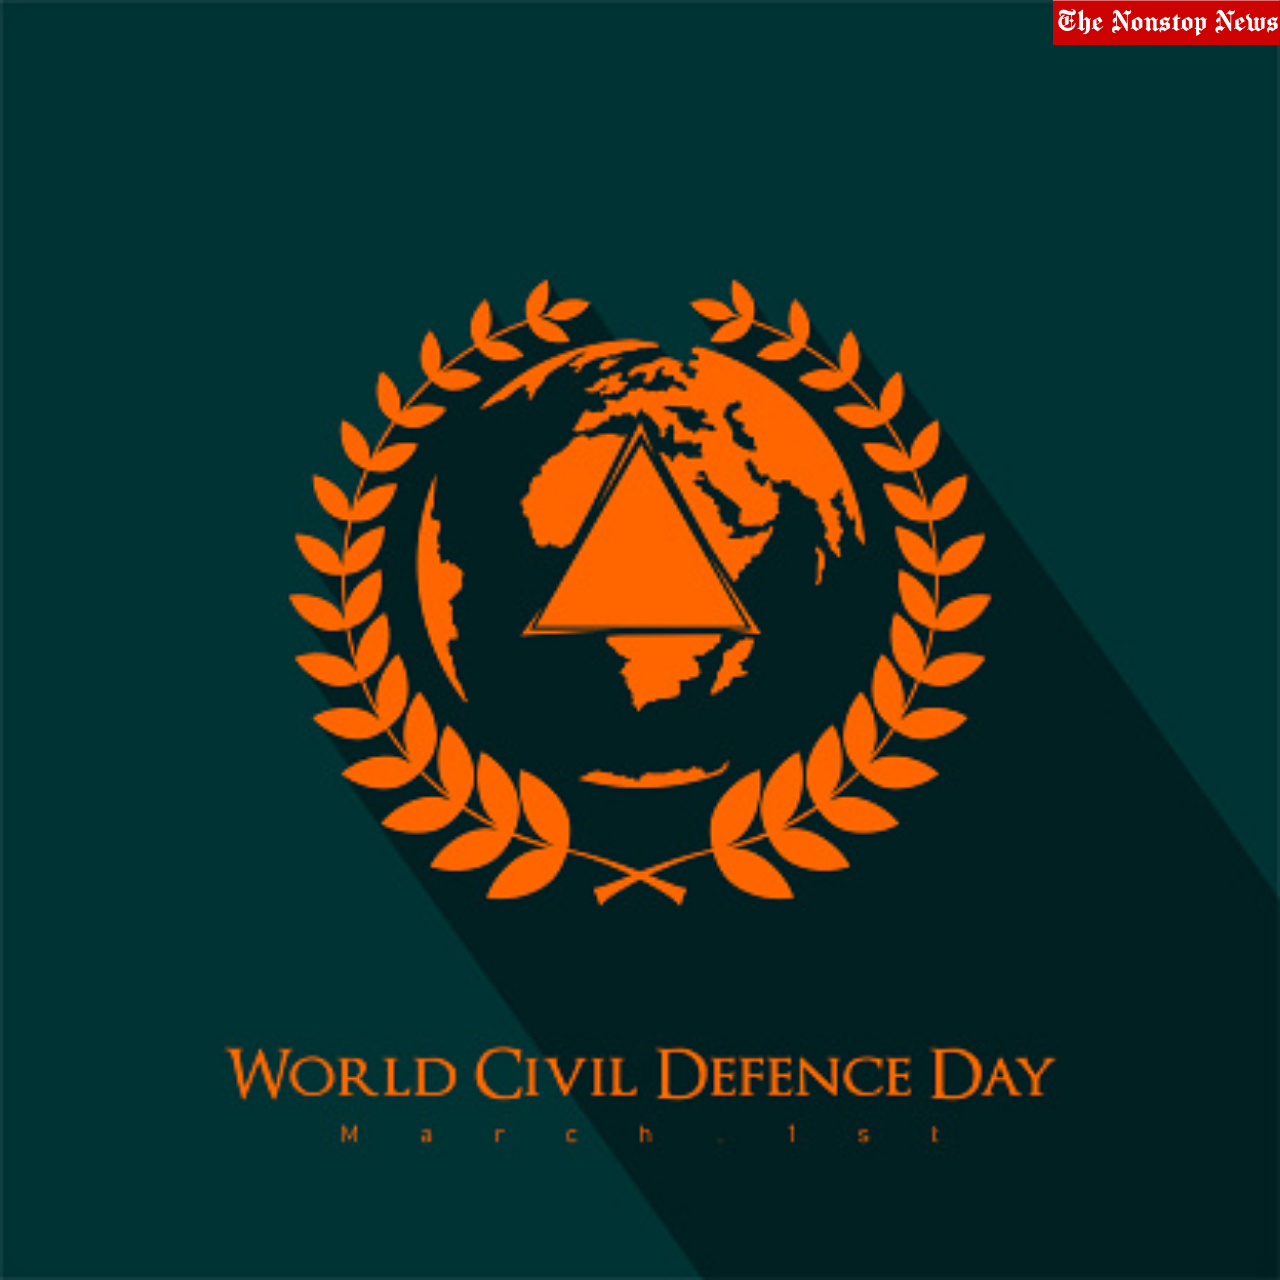 World Civil Defence Day 2022 Quotes, Posters, HD Images, Slogans, Wishes to make people aware of the critical role of civil defense